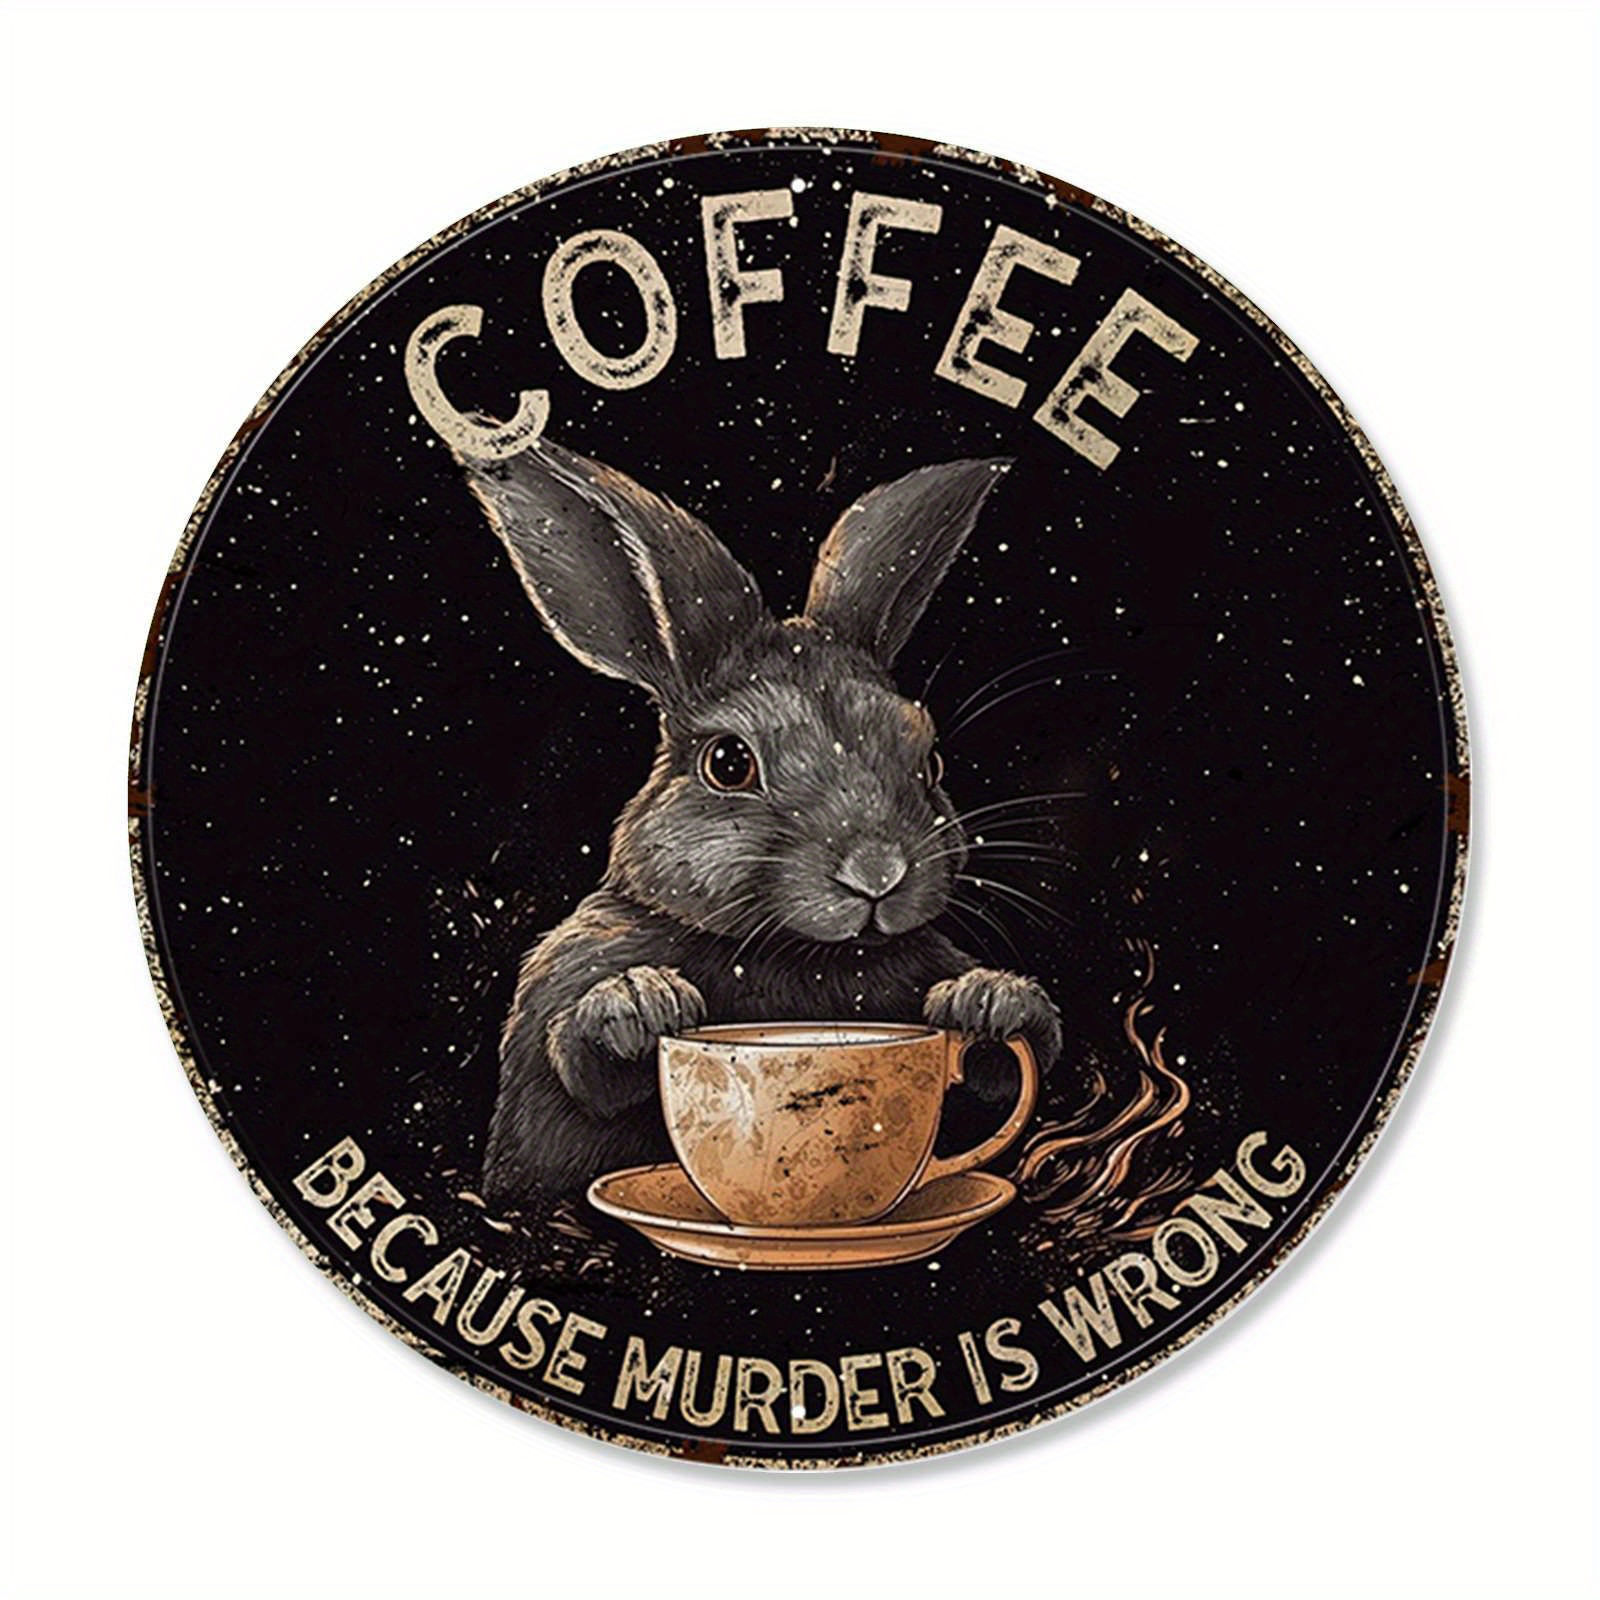 

1pc Round Tin Painting Coffee Because Murder Is Wrong Funny Rabbit Vintage Round Metal Sign Funny Bar Coffee Sign For Cafe Kitchen Club Bar Home Wall Art & Decor Gift 12x12 Inch (30x30cm)